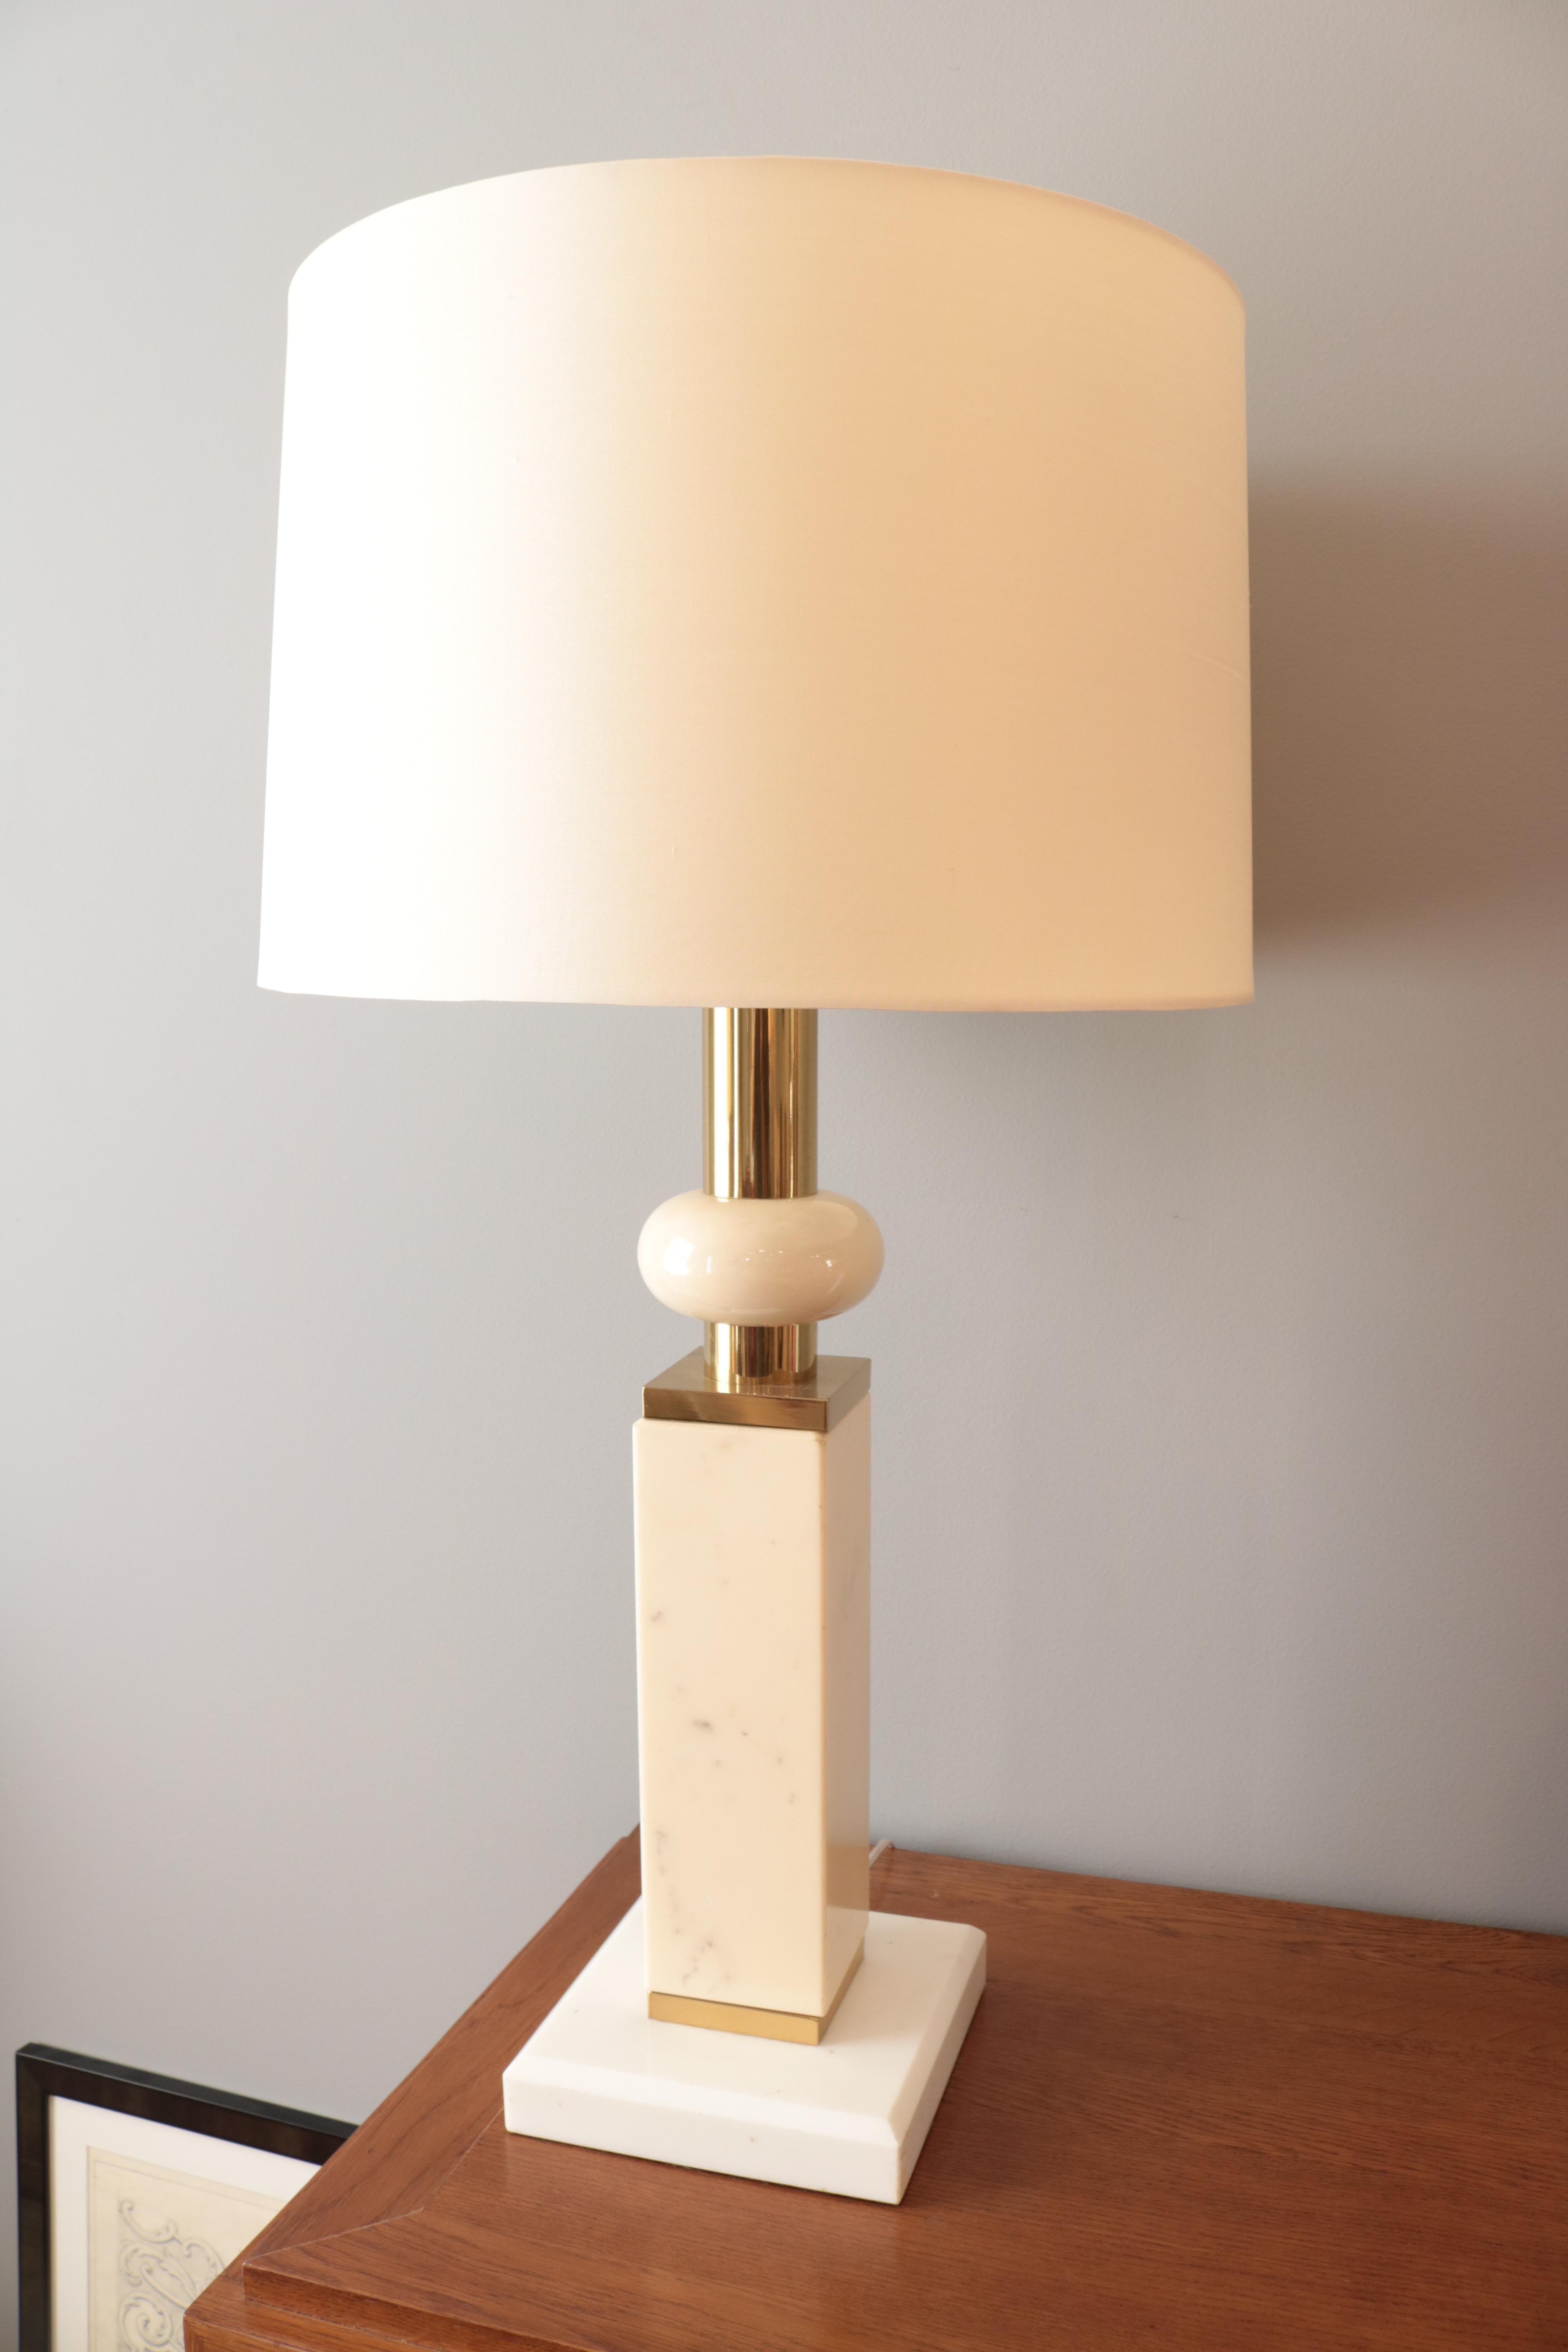 A Modernist marble table lamp. 
White and ivory colored marble 
with patinated brass details.